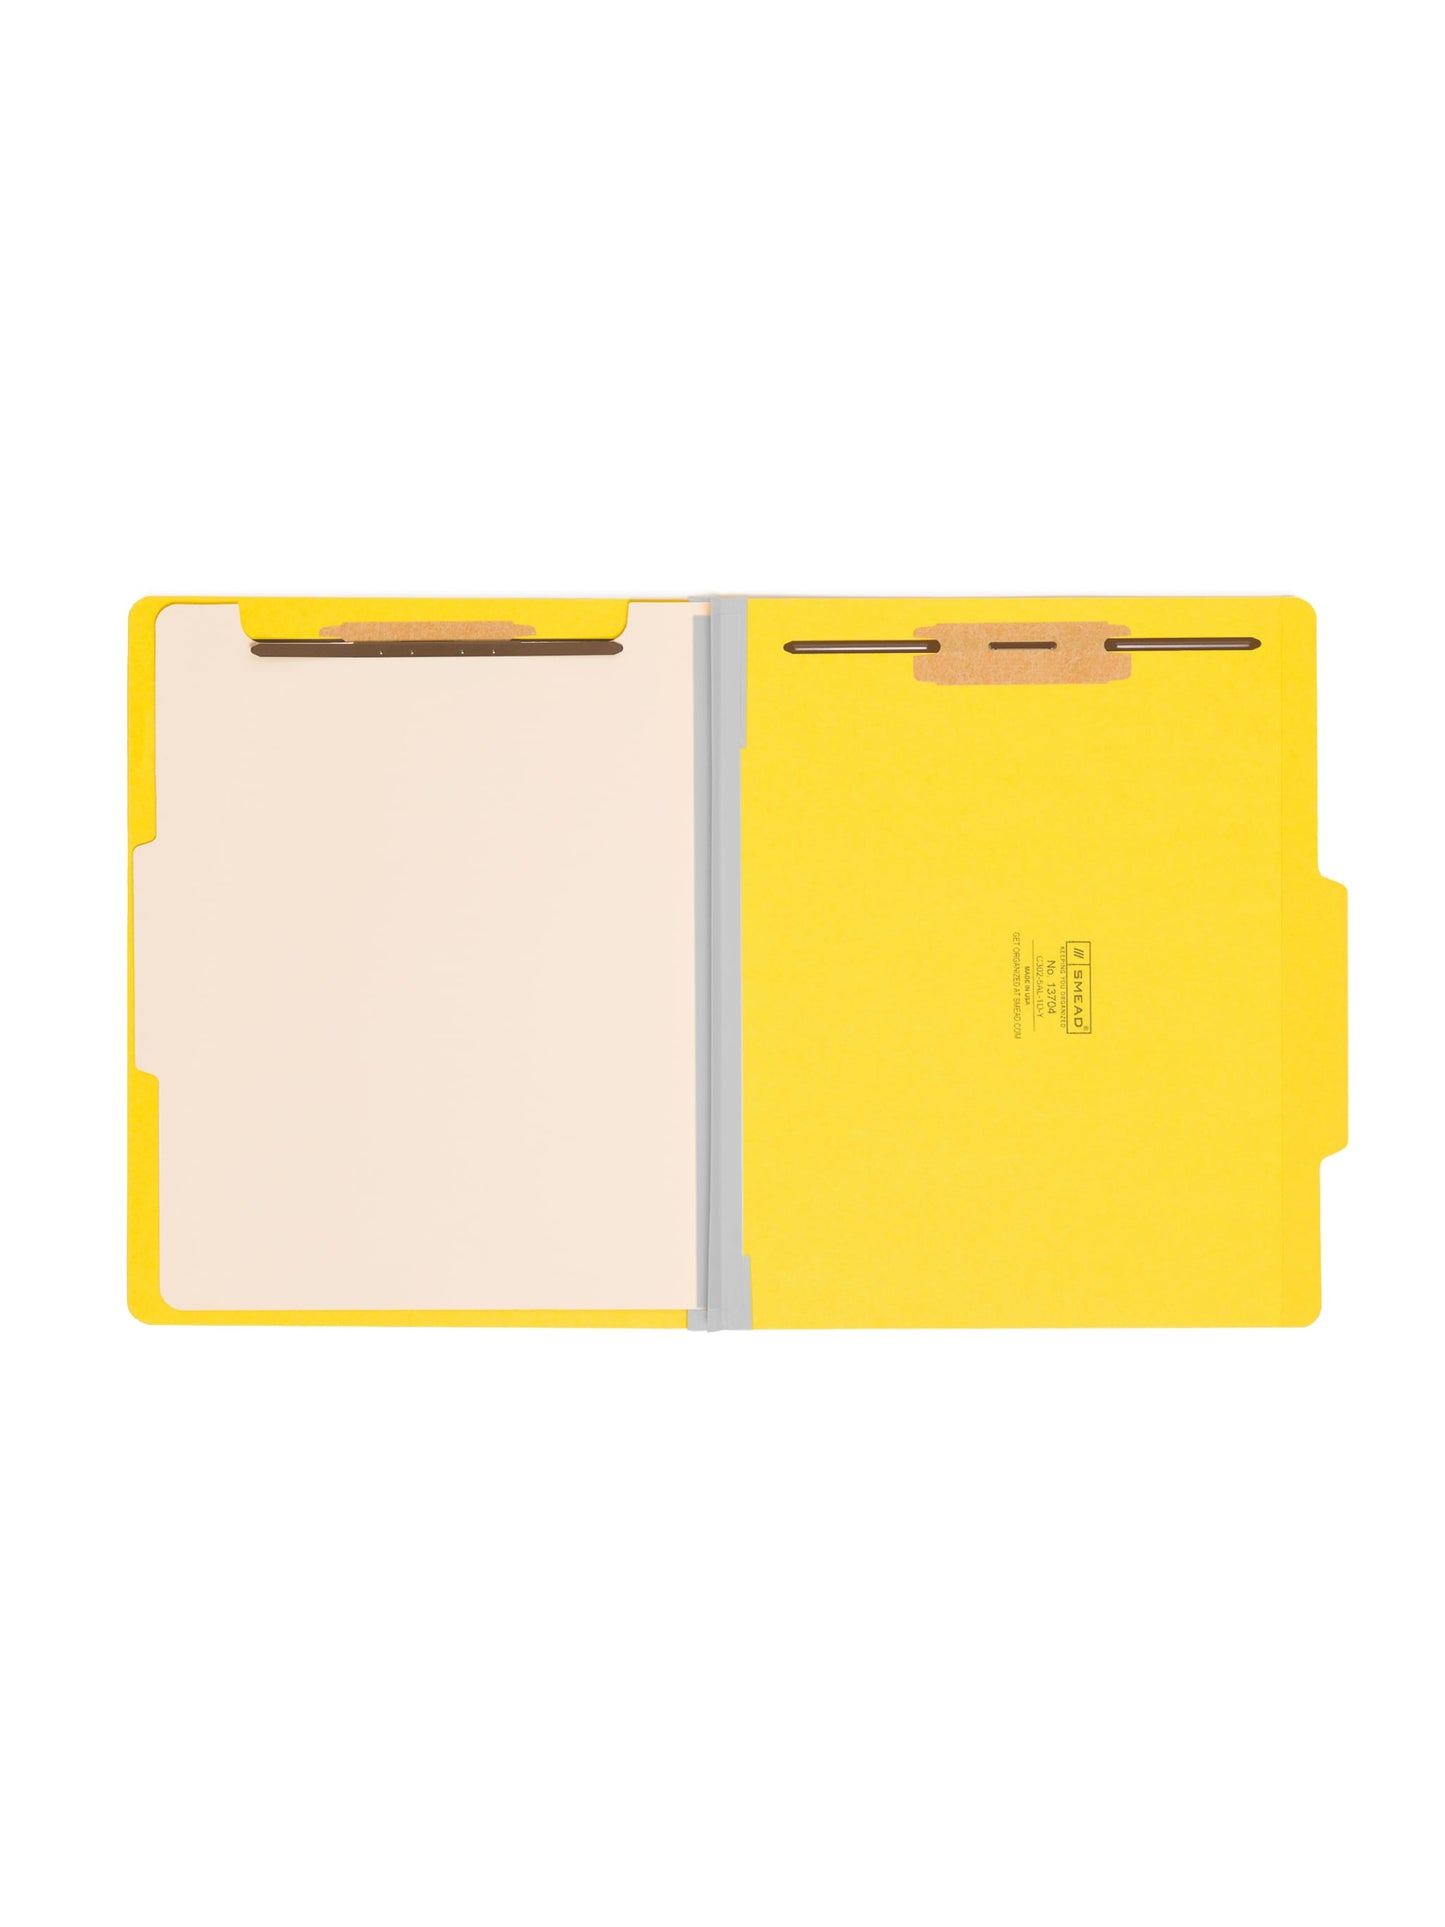 Classification File Folders, 1 Divider, 2 inch Expansion, Yellow Color, Letter Size, Set of 0, 30086486137042